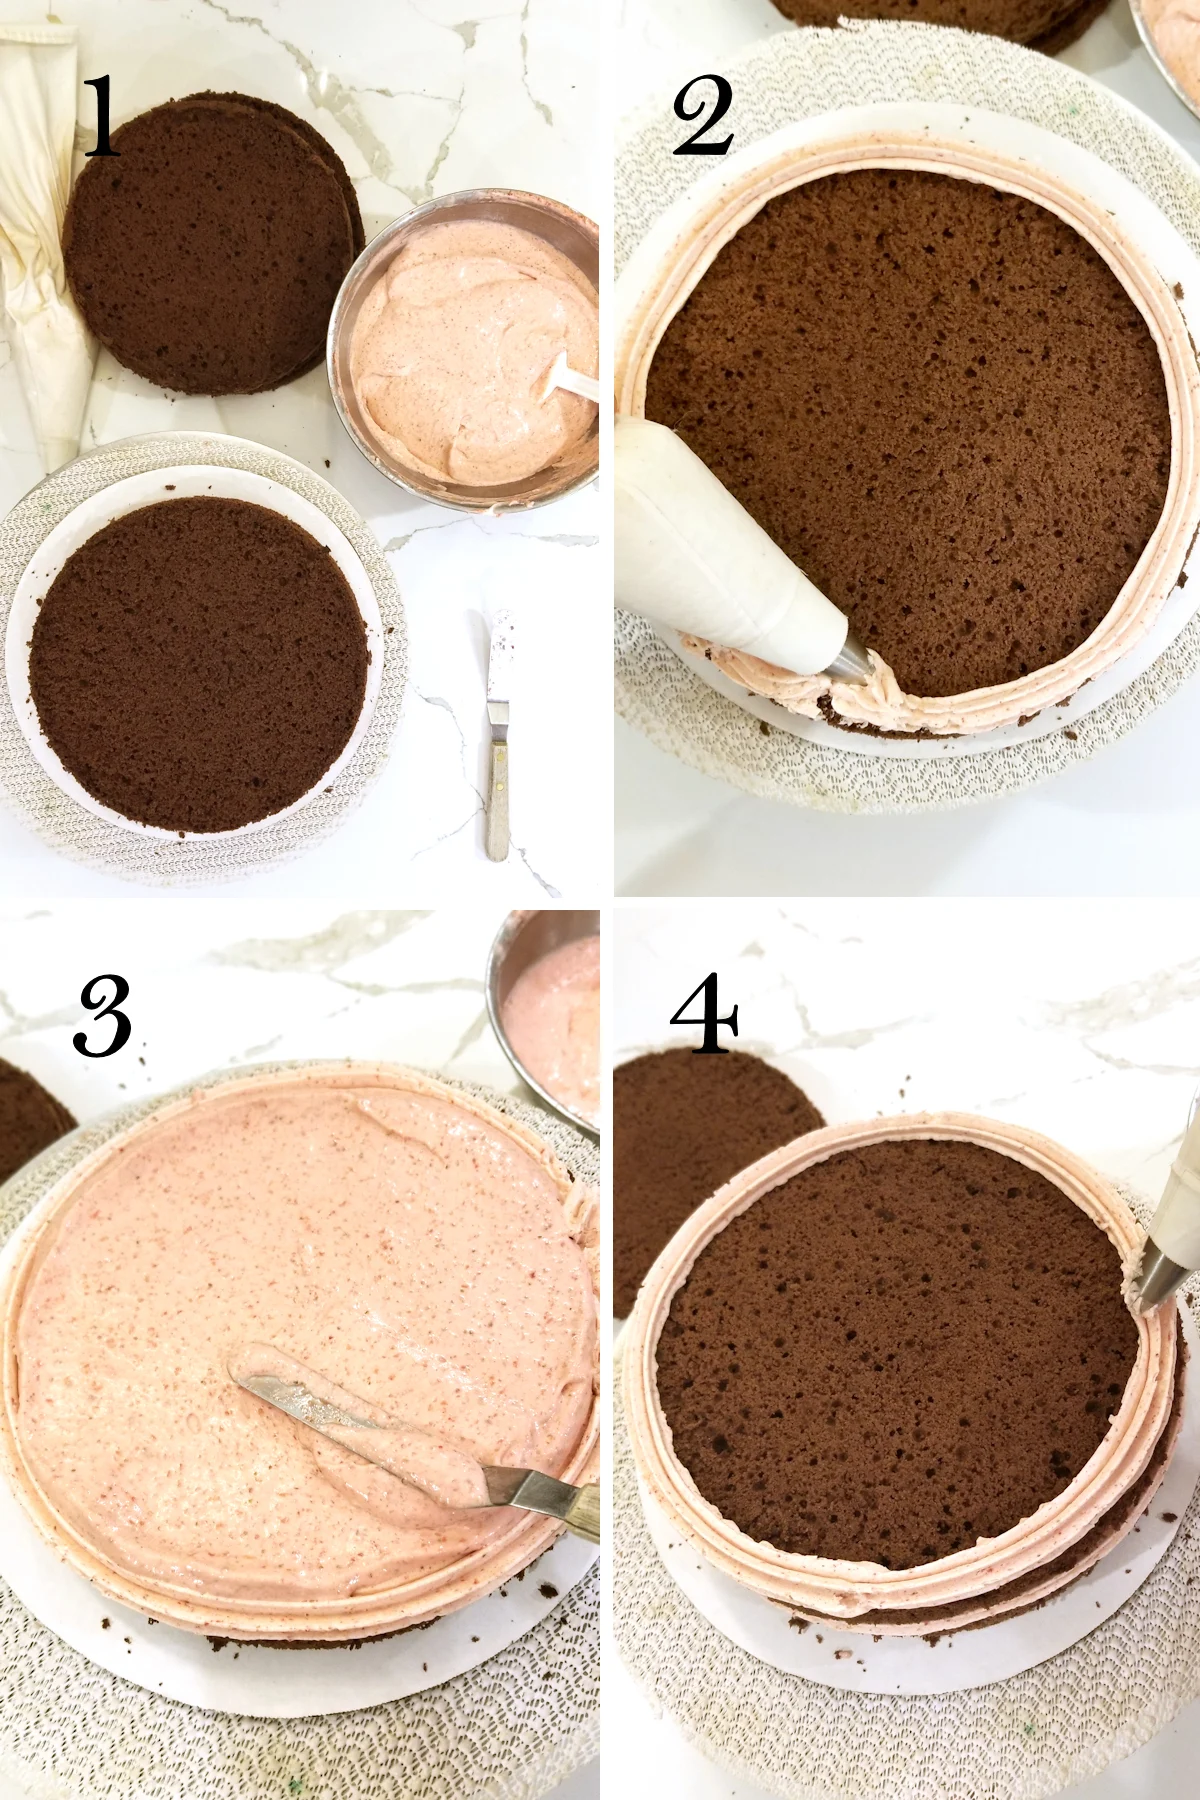 1. Cake layers and a bowl of mousse on a white surface. 2. A piping bag piping buttercream dam on a cake. 3. Spreading mousse onto a cake. 4. Adding another layer to the cake.